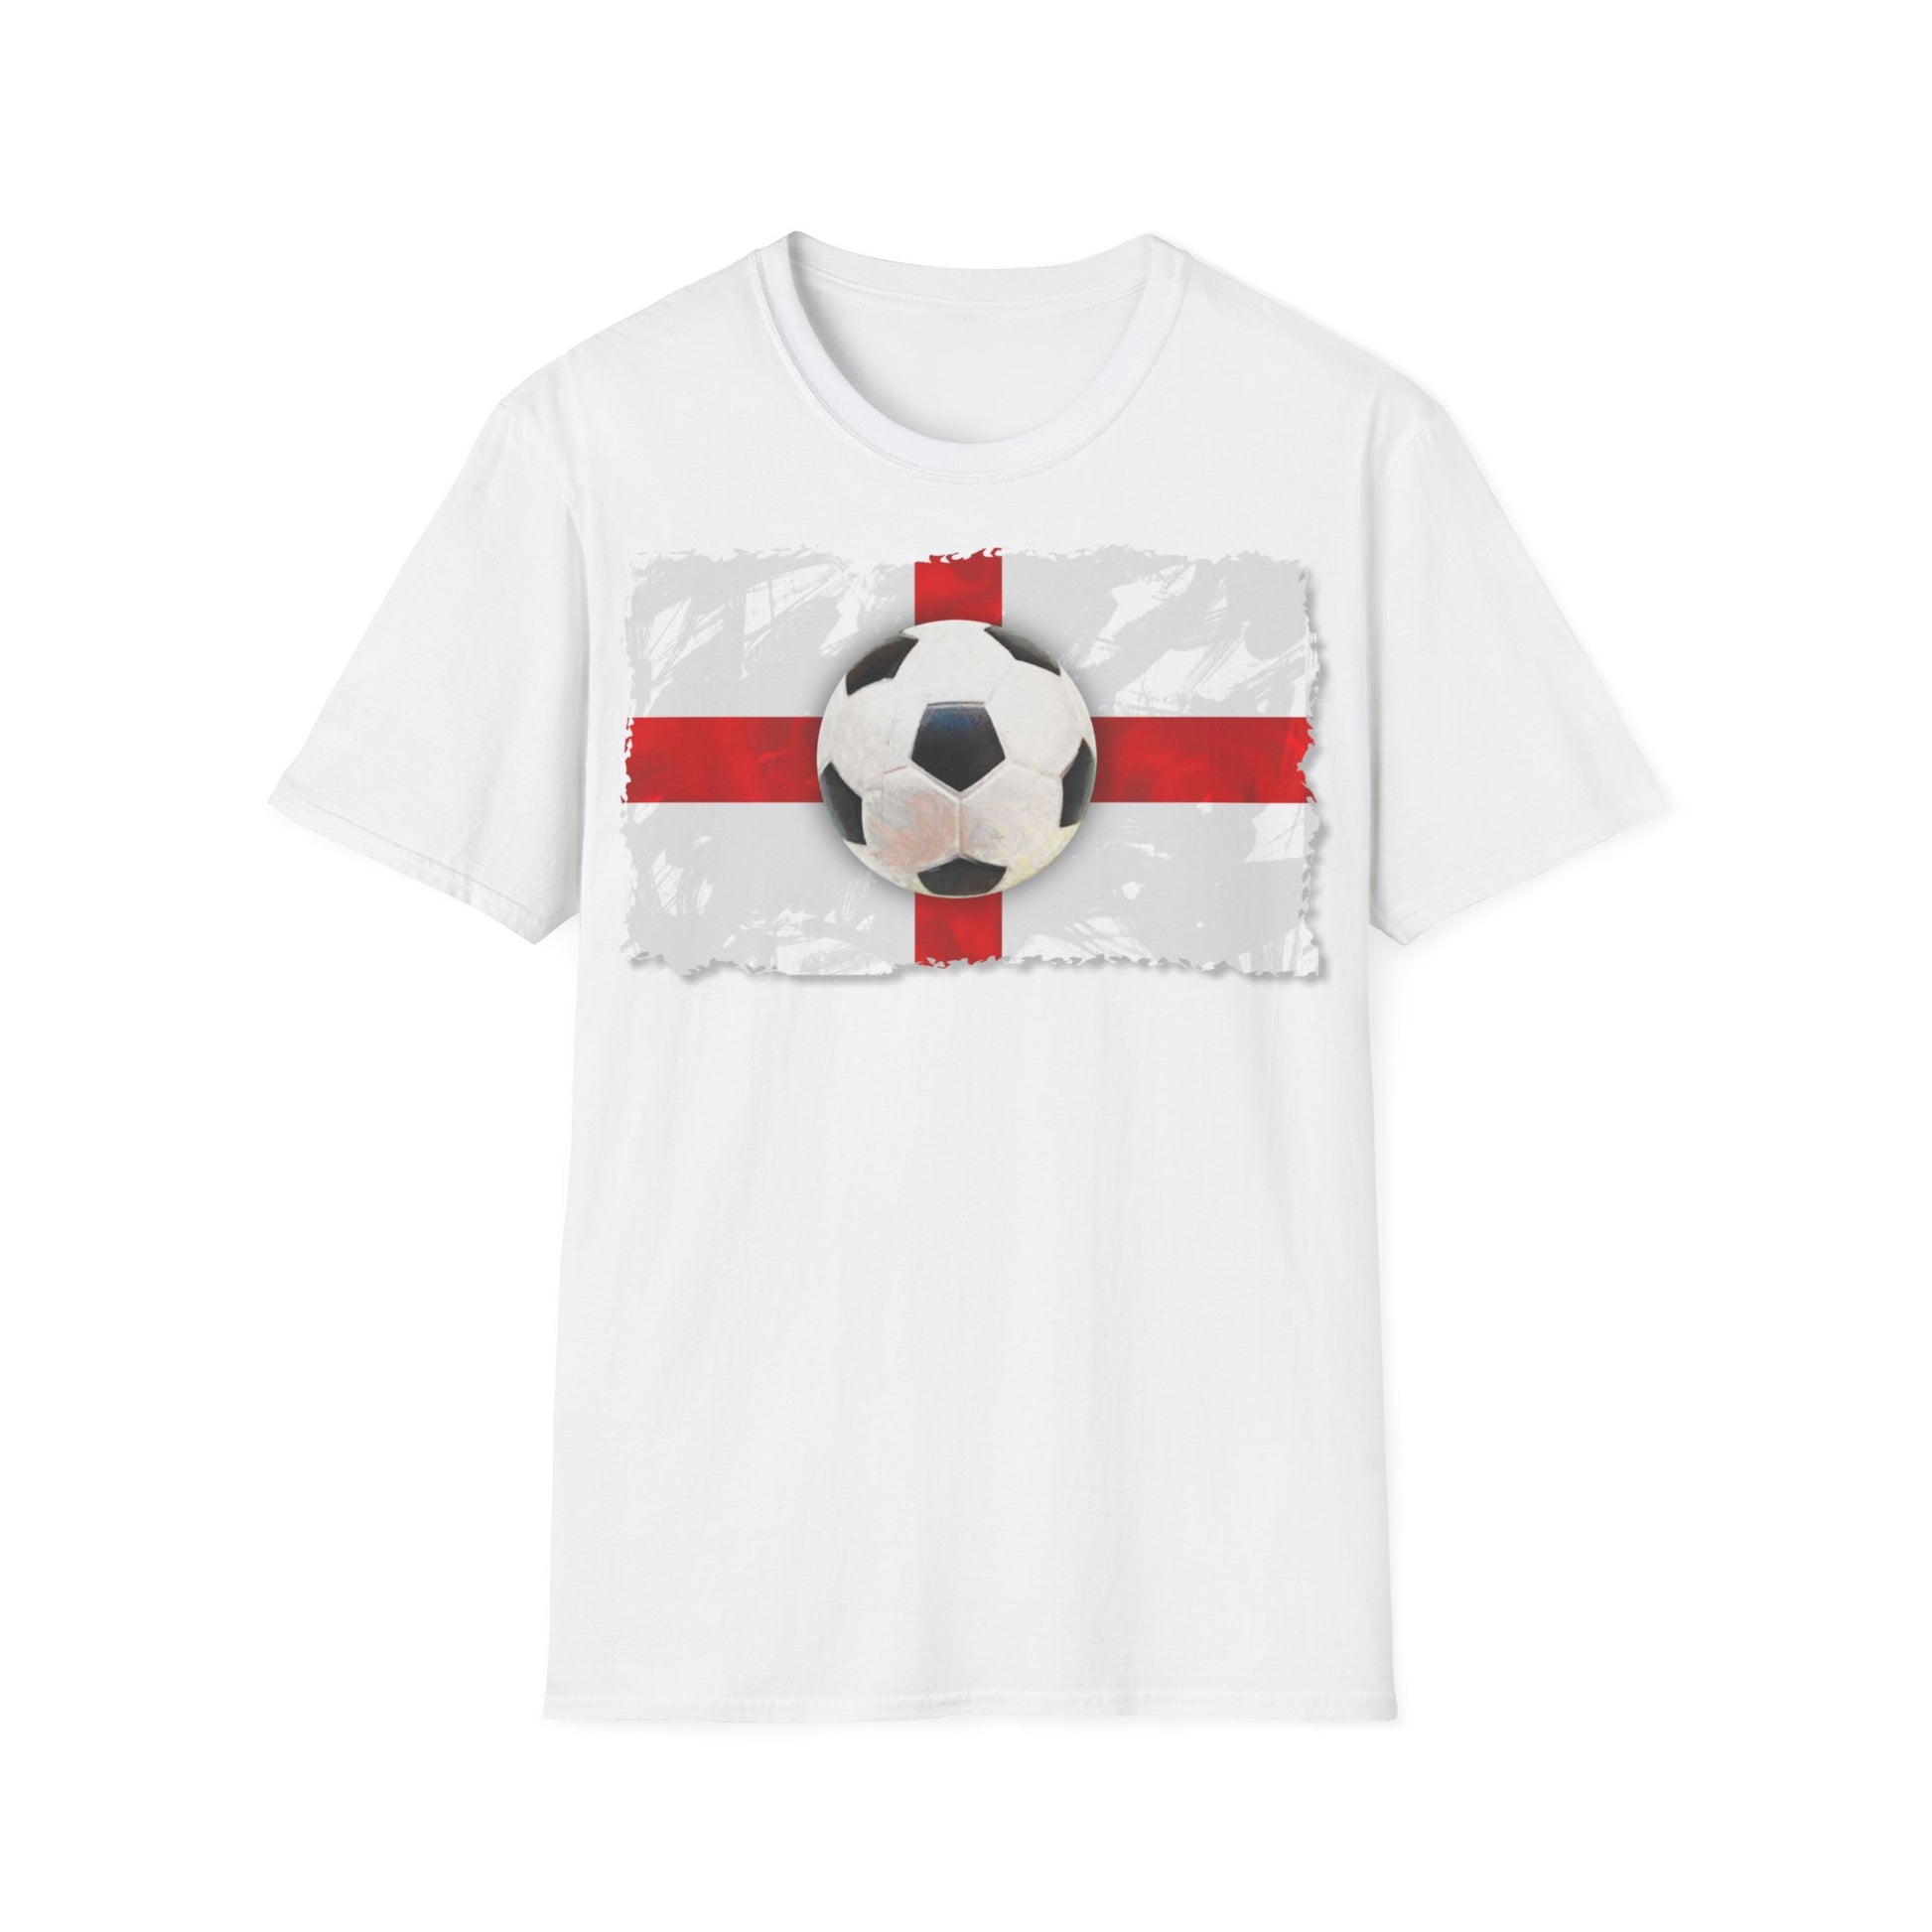 A white t-shirt with a painted design of the English flag and a football in the middle